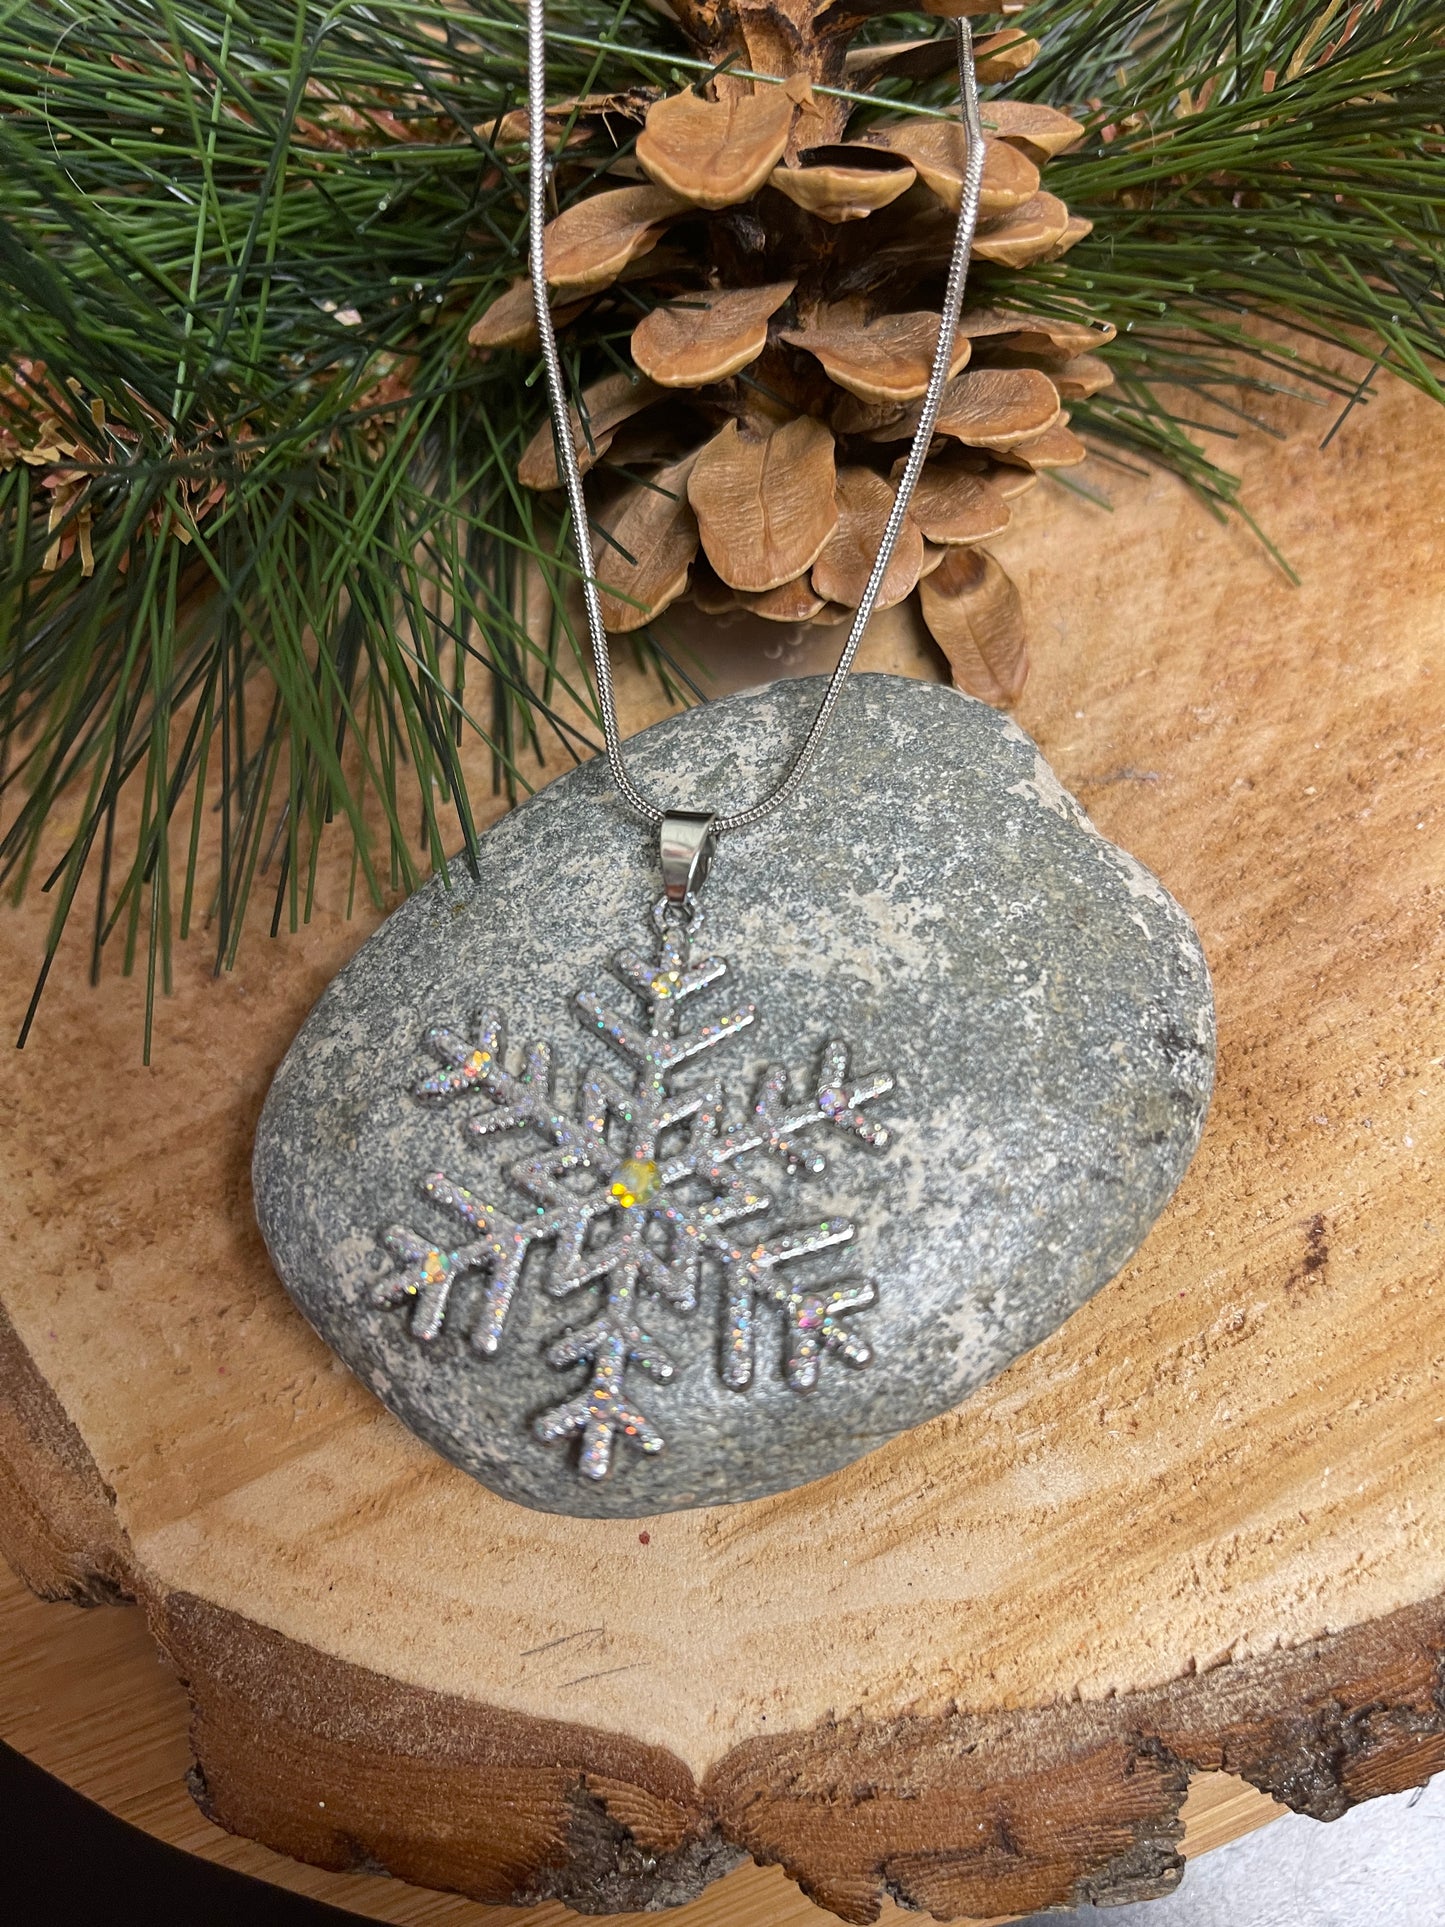 Glitter Snowflake Pendant on a Silver chain Necklace